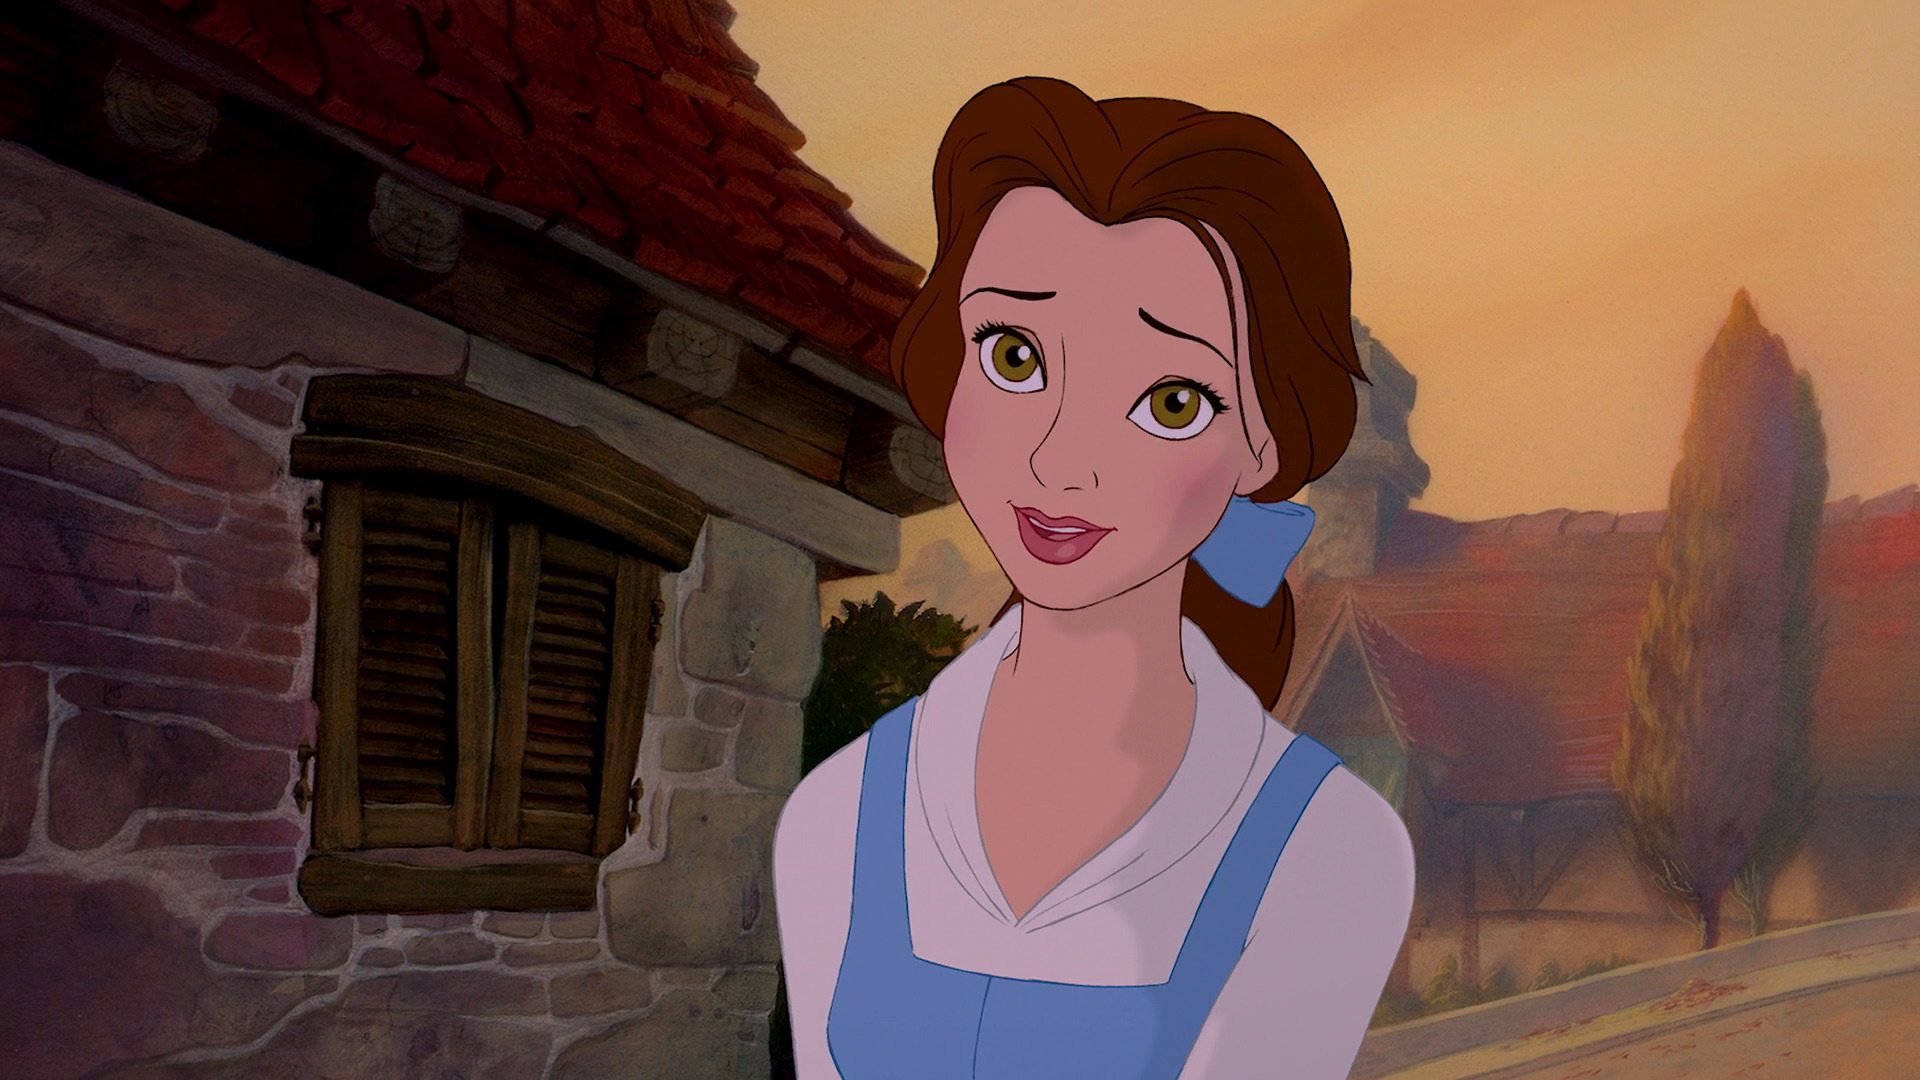 Belle, Beauty And The Beast Wiki